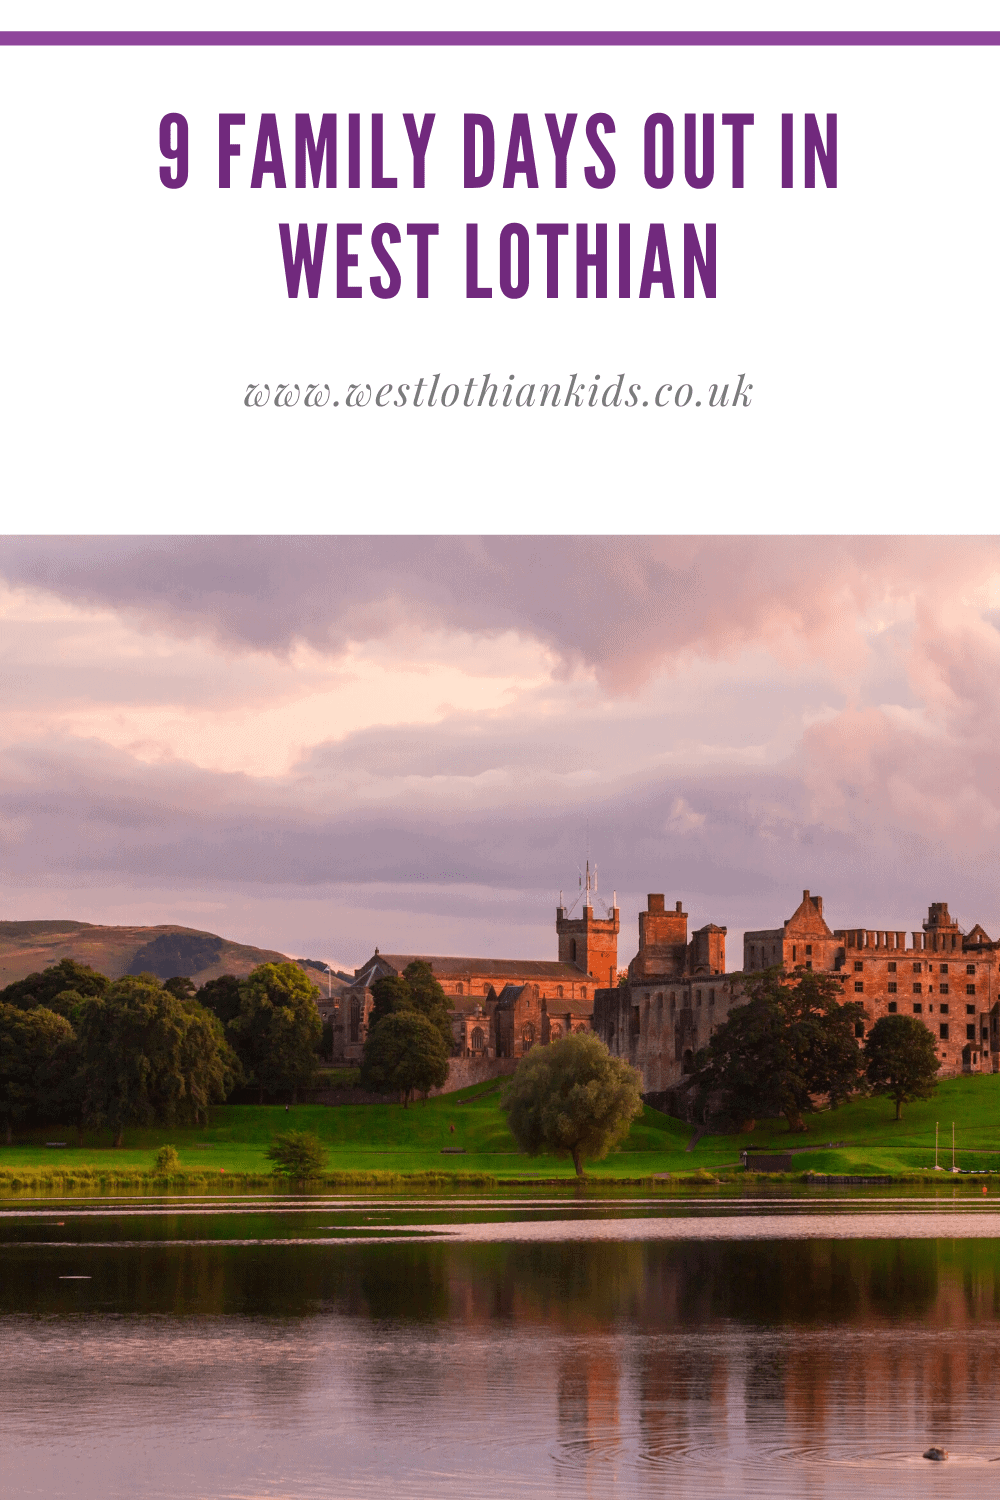 9 Fantastic Family Days Out In West Lothian | Go Explore West Lothian With Kids